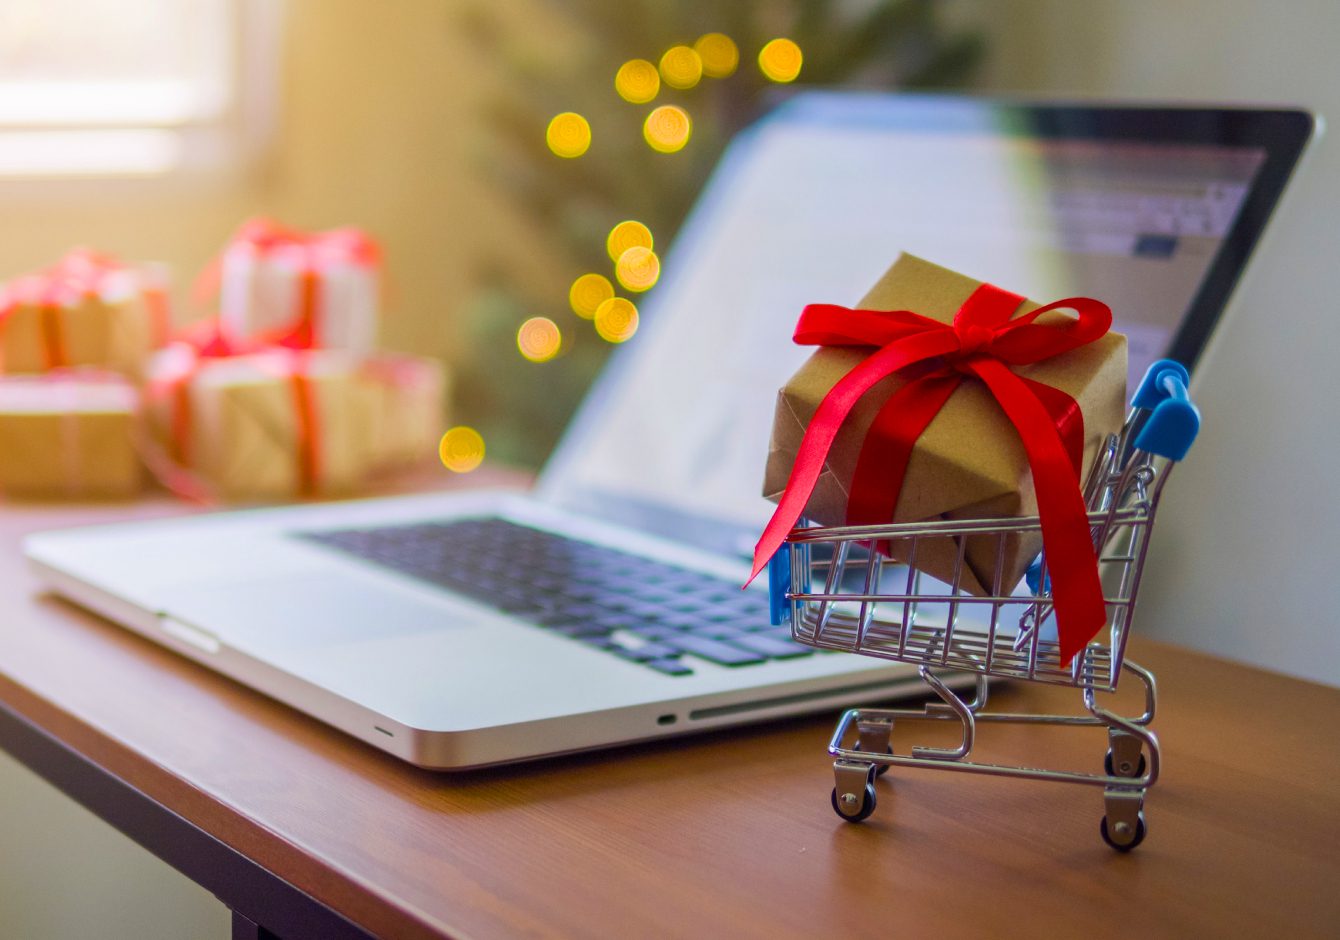 Mini shopping cart with gift inside it on table beside laptop with Christmas tree in background